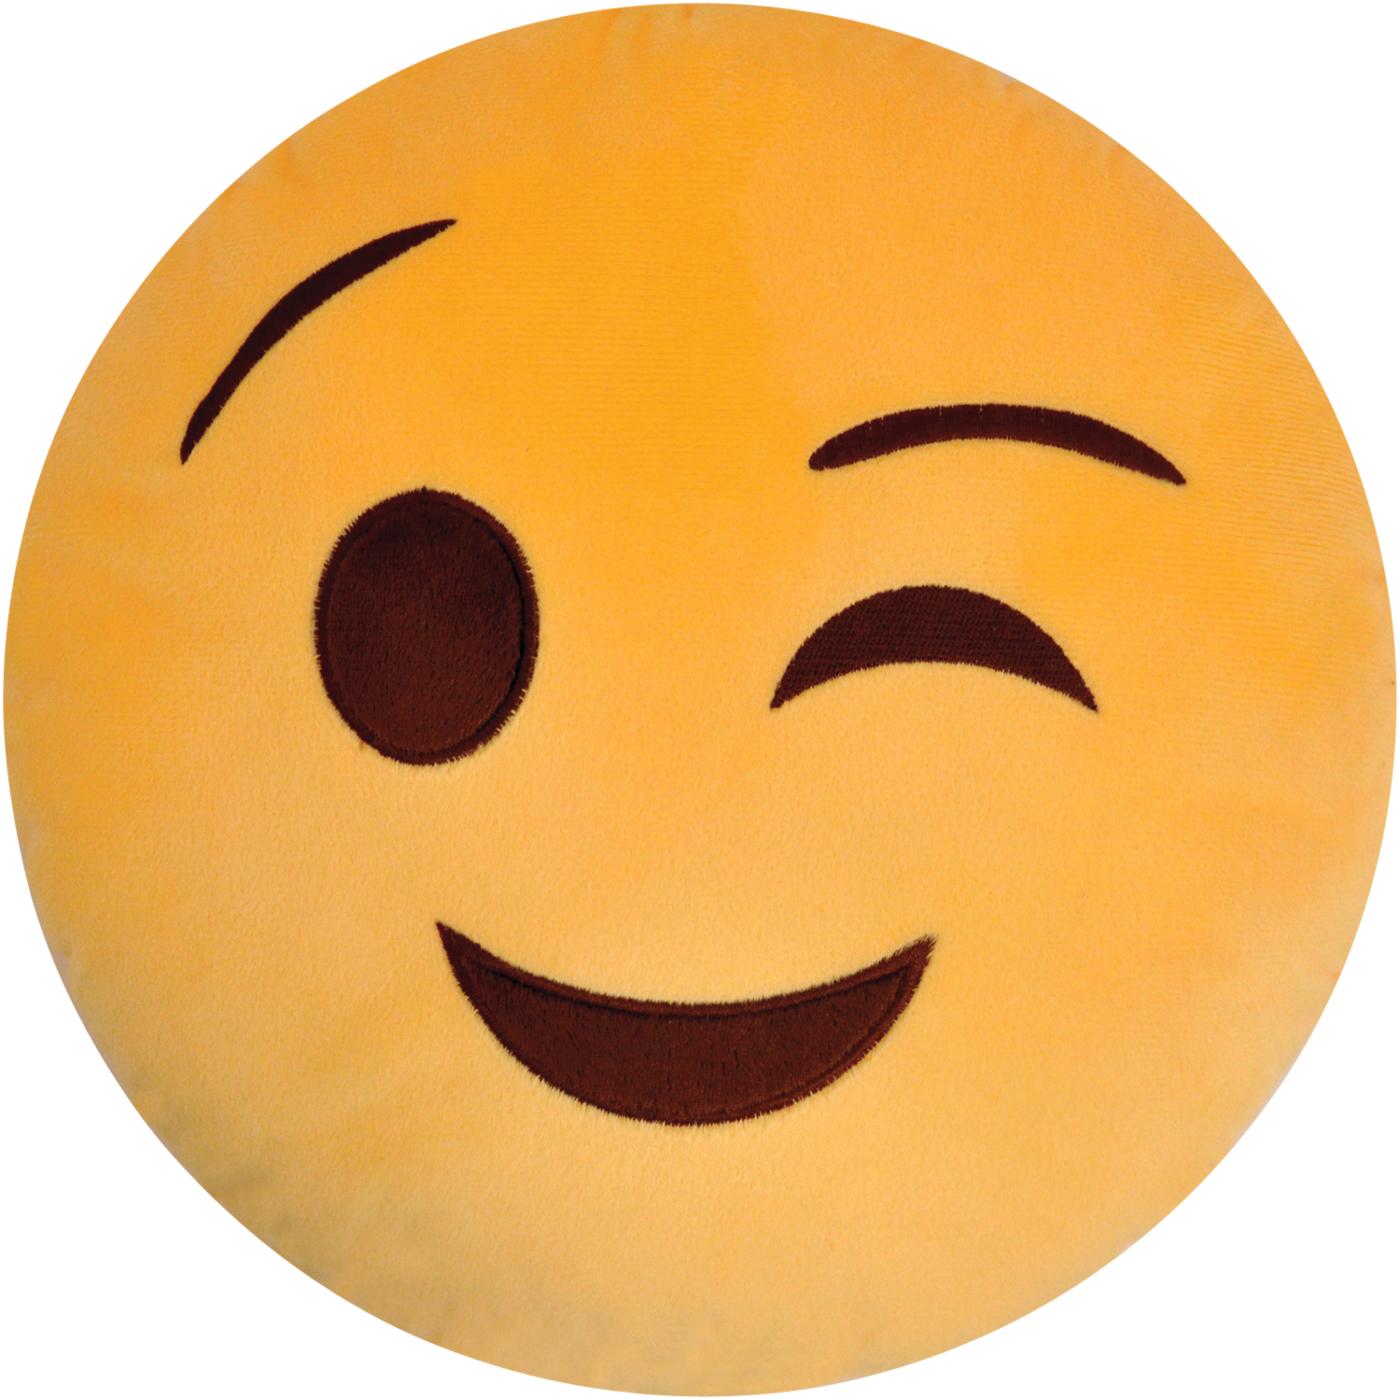 Emoji Pals Assorted Pillow Puffs, Colors & Designs May Vary; image 1 of 8